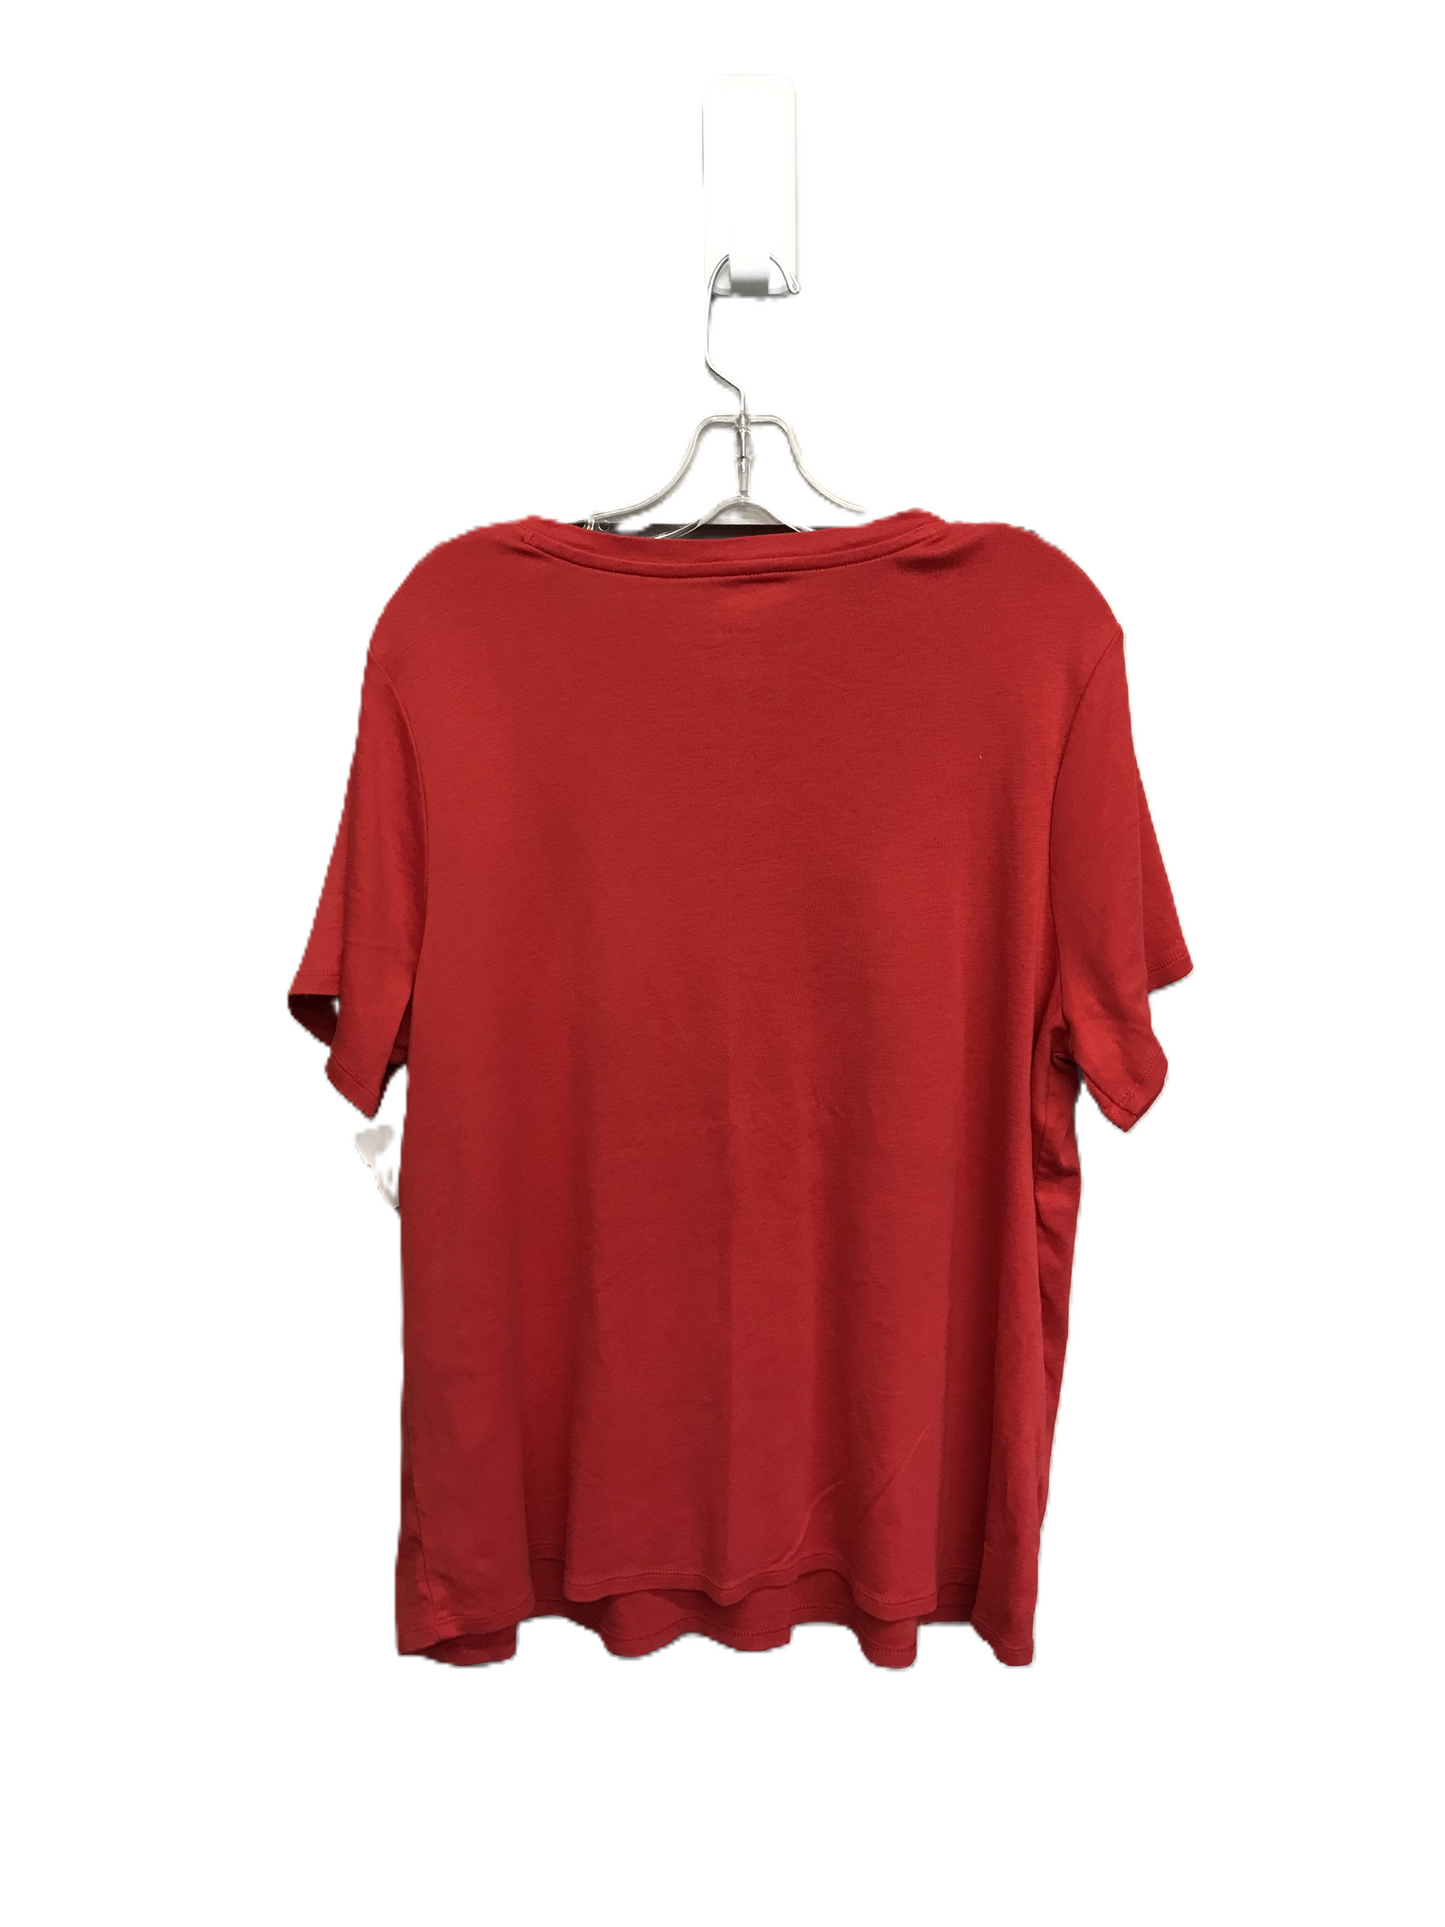 Red Top Short Sleeve Basic By J. Jill, Size: 2x